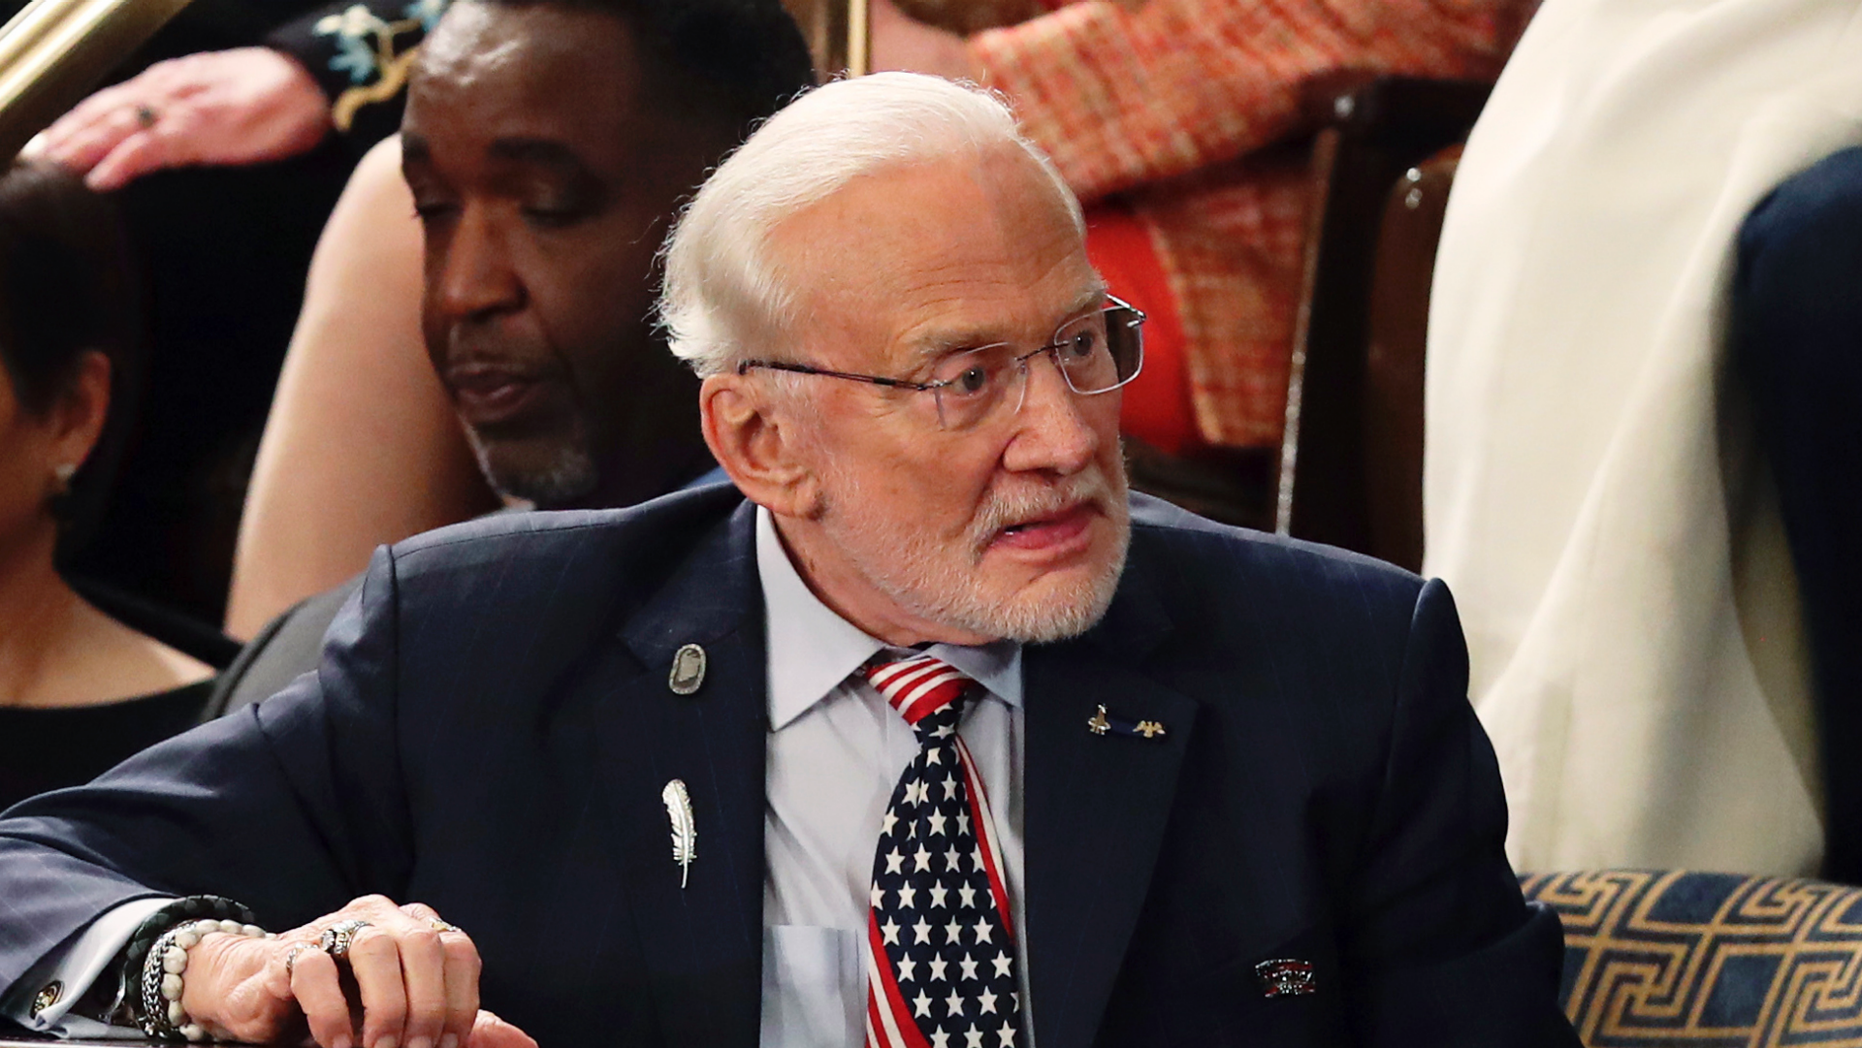 DOSSIER - In this photo of February 5, 2019, astronaut Buzz Aldrin arrives for President Donald Trump's State of the Union address at a joint session of Congress on Capitol Hill in Washington. Aldrin's legal battle with his grown-up children over the former astronaut's ability to manage his business ended on Wednesday, March 13, preventing a messy intrafamily clash from celebrating this summer's 50th anniversary of his moon tour Apollo 11. (AP Photo / Andrew Harnik, File)